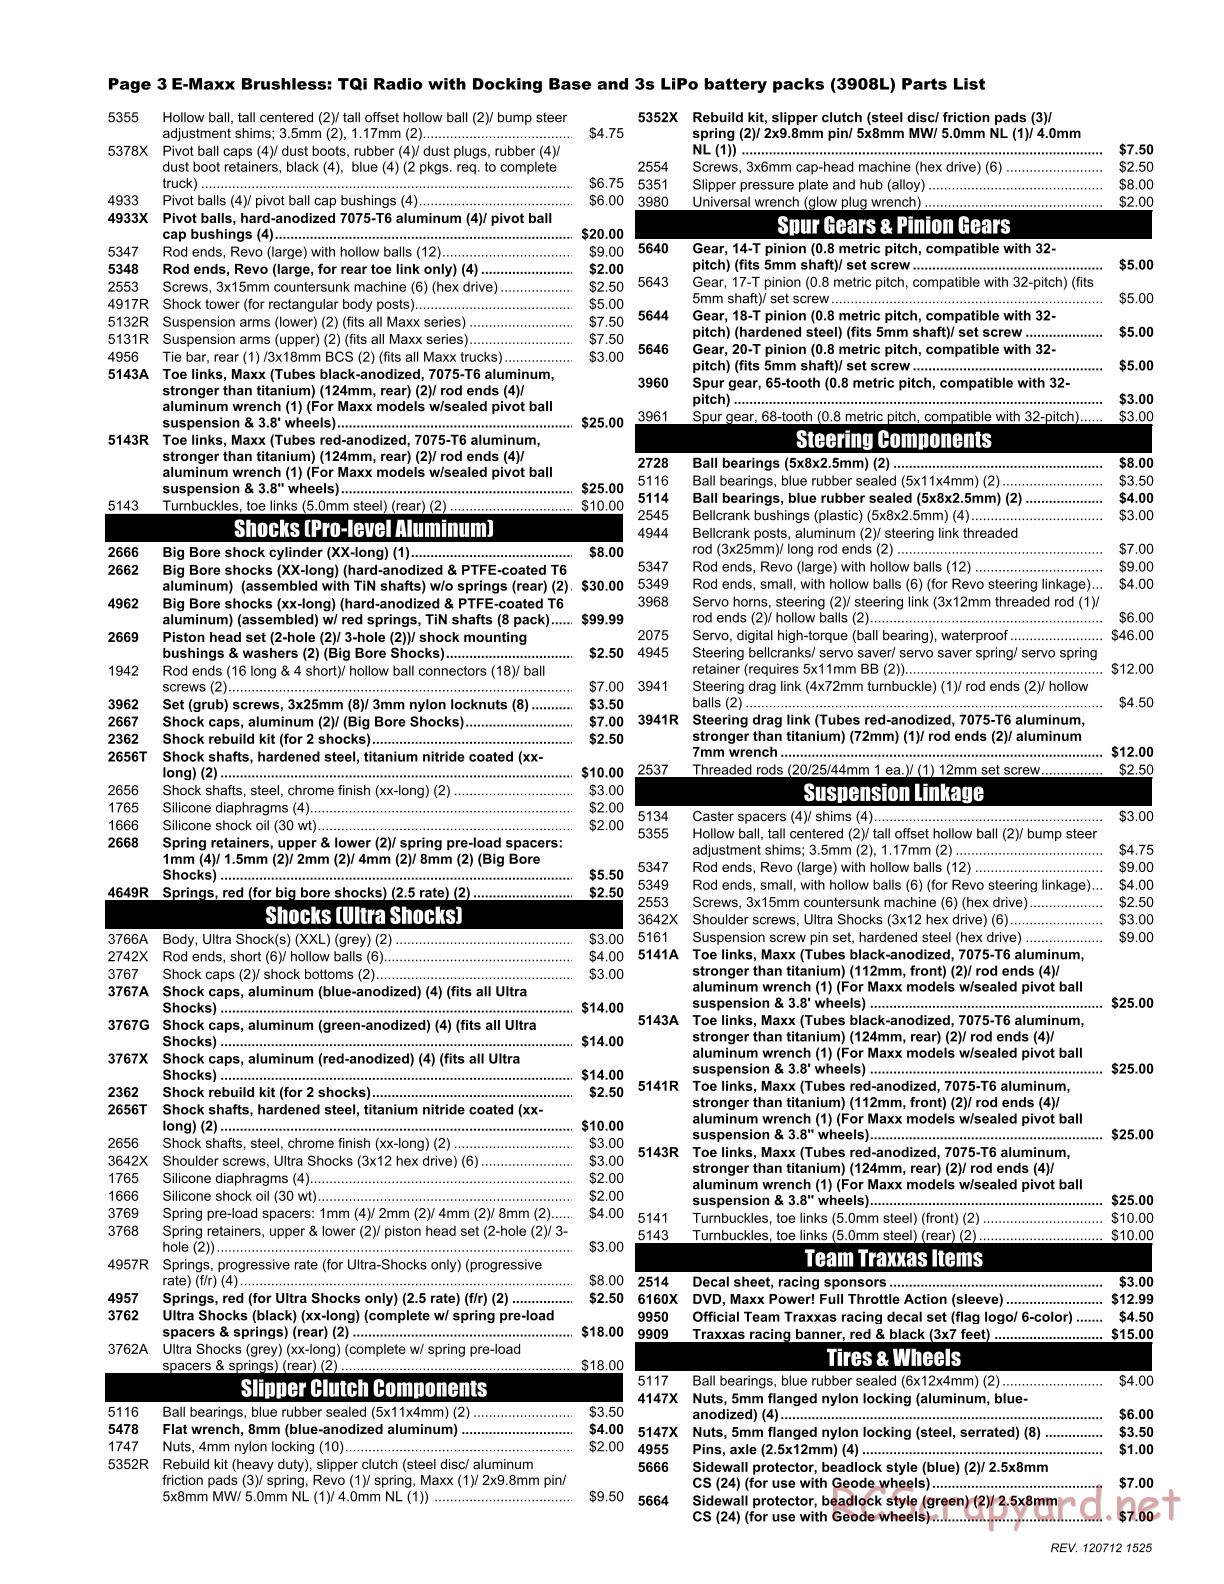 Traxxas - E-Maxx Brushless - Parts List - Page 3